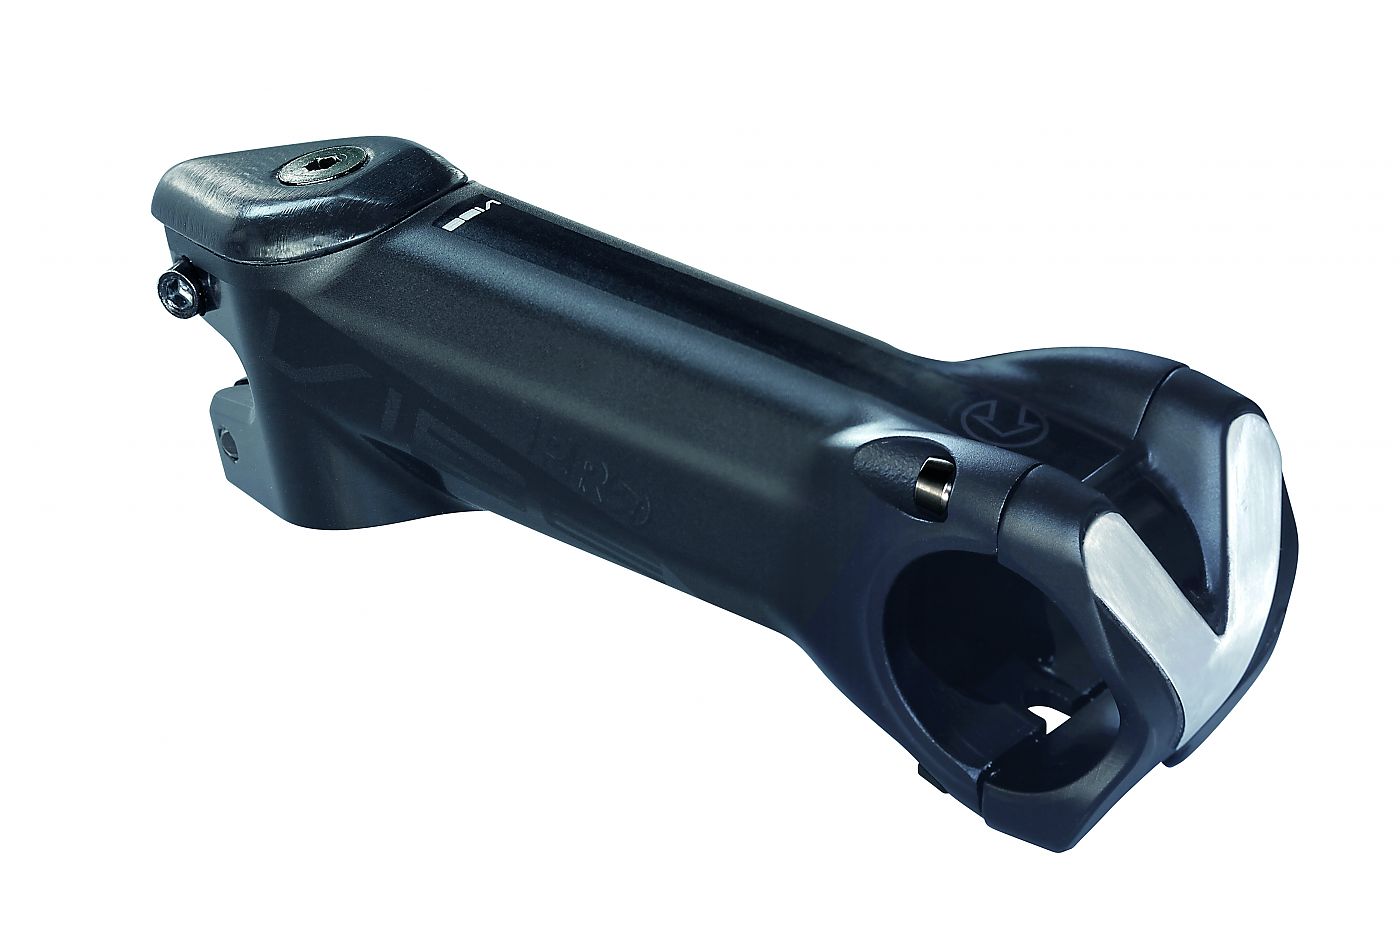 Shimano PRO Vibe Alloy Stems recalled for cracking concerns 